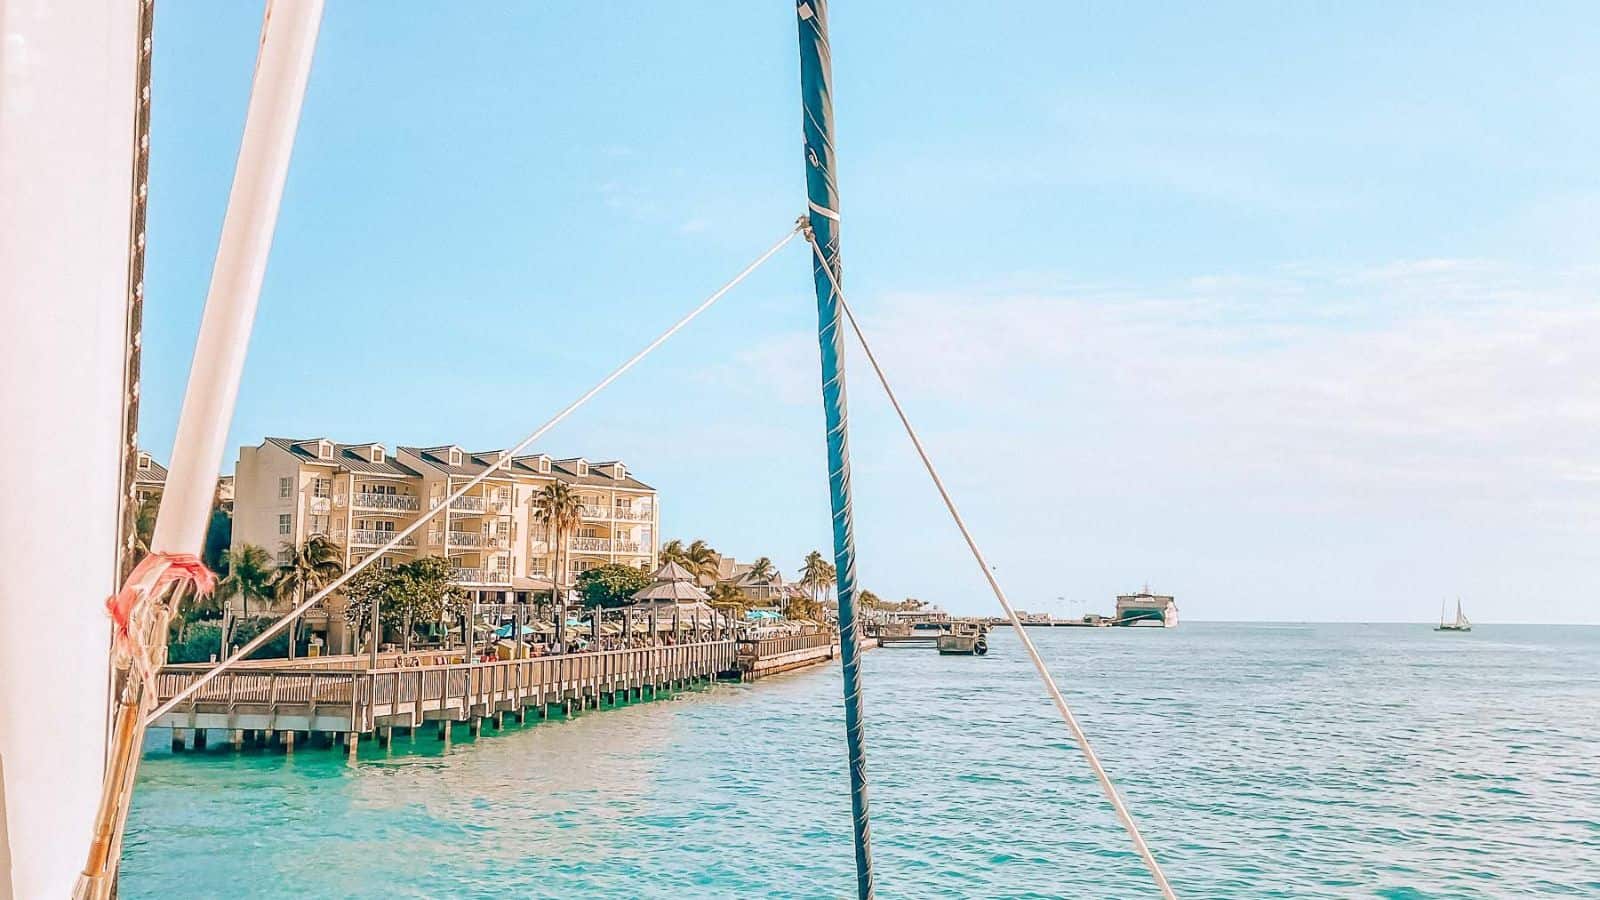 <p>Journey from Miami to Key West on the stunning Overseas Highway, driving over breathtaking bridges and experiencing the laid-back island vibes of the <a href="https://whatthefab.com/florida-keys-itinerary.html" rel="follow">Florida Keys</a>.</p><p>This 113-mile route takes you through a series of <a href="https://whatthefab.com/florida-cities.html" rel="follow">tropical islands</a>, offering opportunities for snorkeling, fishing, and enjoying the pristine beaches.</p><p>Stop at iconic landmarks like the Seven Mile Bridge, Bahia Honda State Park, and the southernmost point of the continental U.S. in Key West. Indulge in fresh seafood, explore quirky art galleries, and watch the sunset over the Gulf of Mexico.</p>